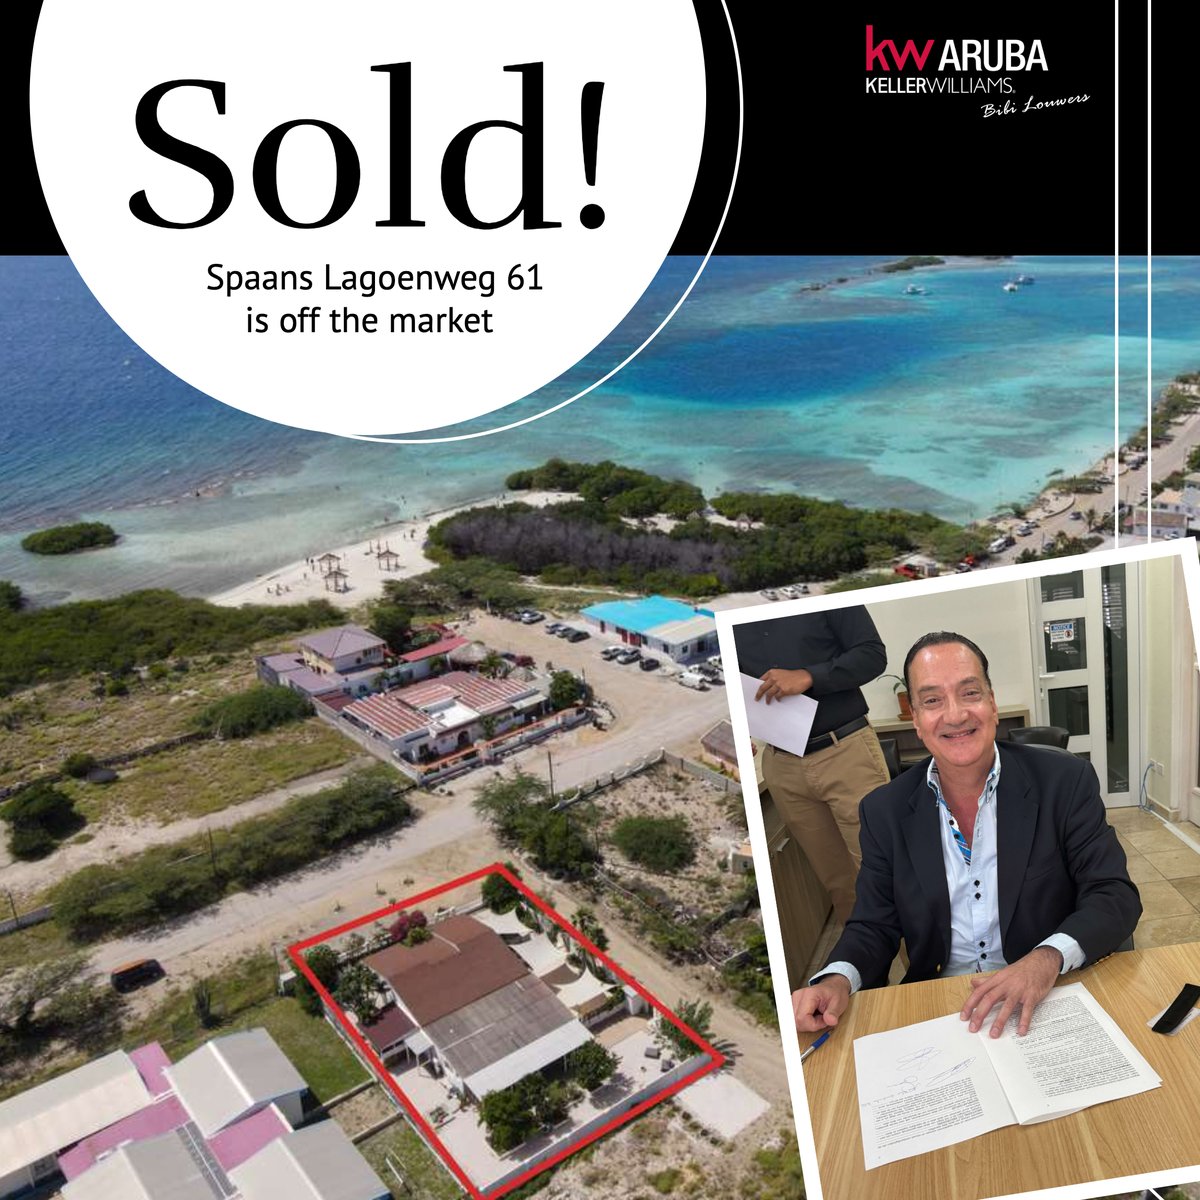 Just sold! 🎉 Congratulations to the fantastic seller and buyers! Wishing you all the best on your exciting new adventures! 🏡✨ #JustSold #Congratulations #NewAdventures
.
Thank you Notary Yarzagaray for your service!